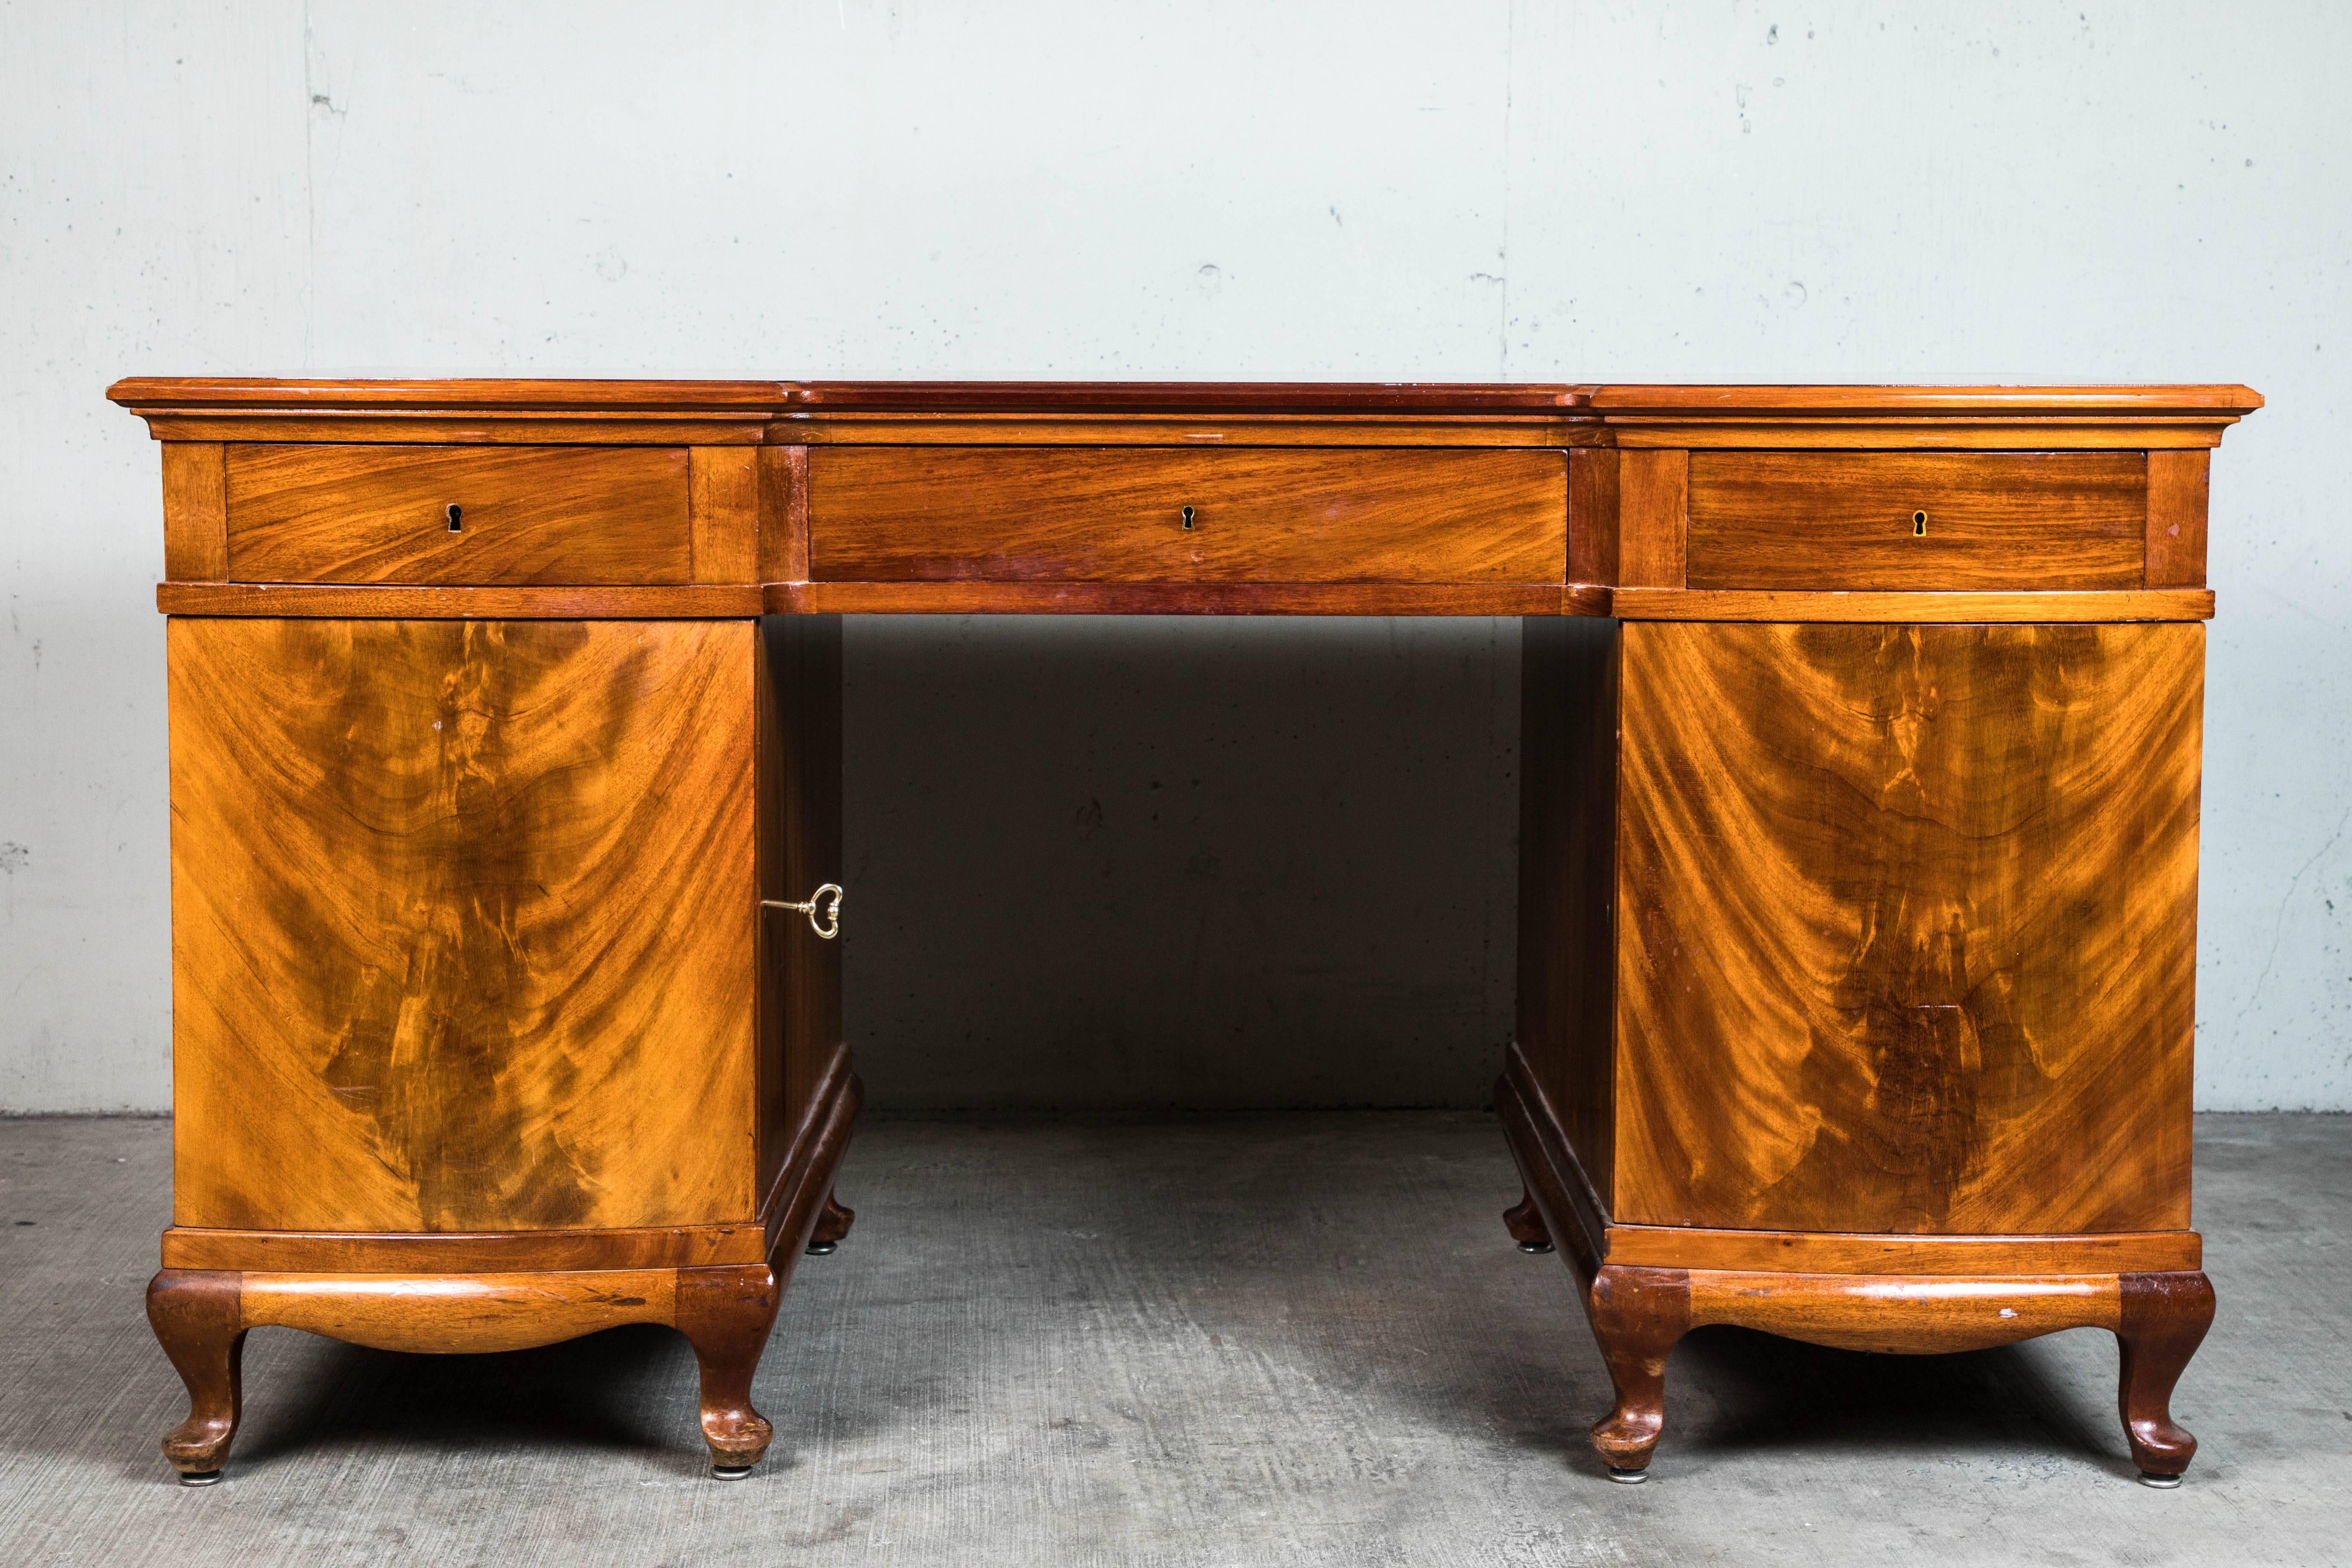 1940s mahogany desk with carved feet and eight drawers. Each side of drawers opens with a key.